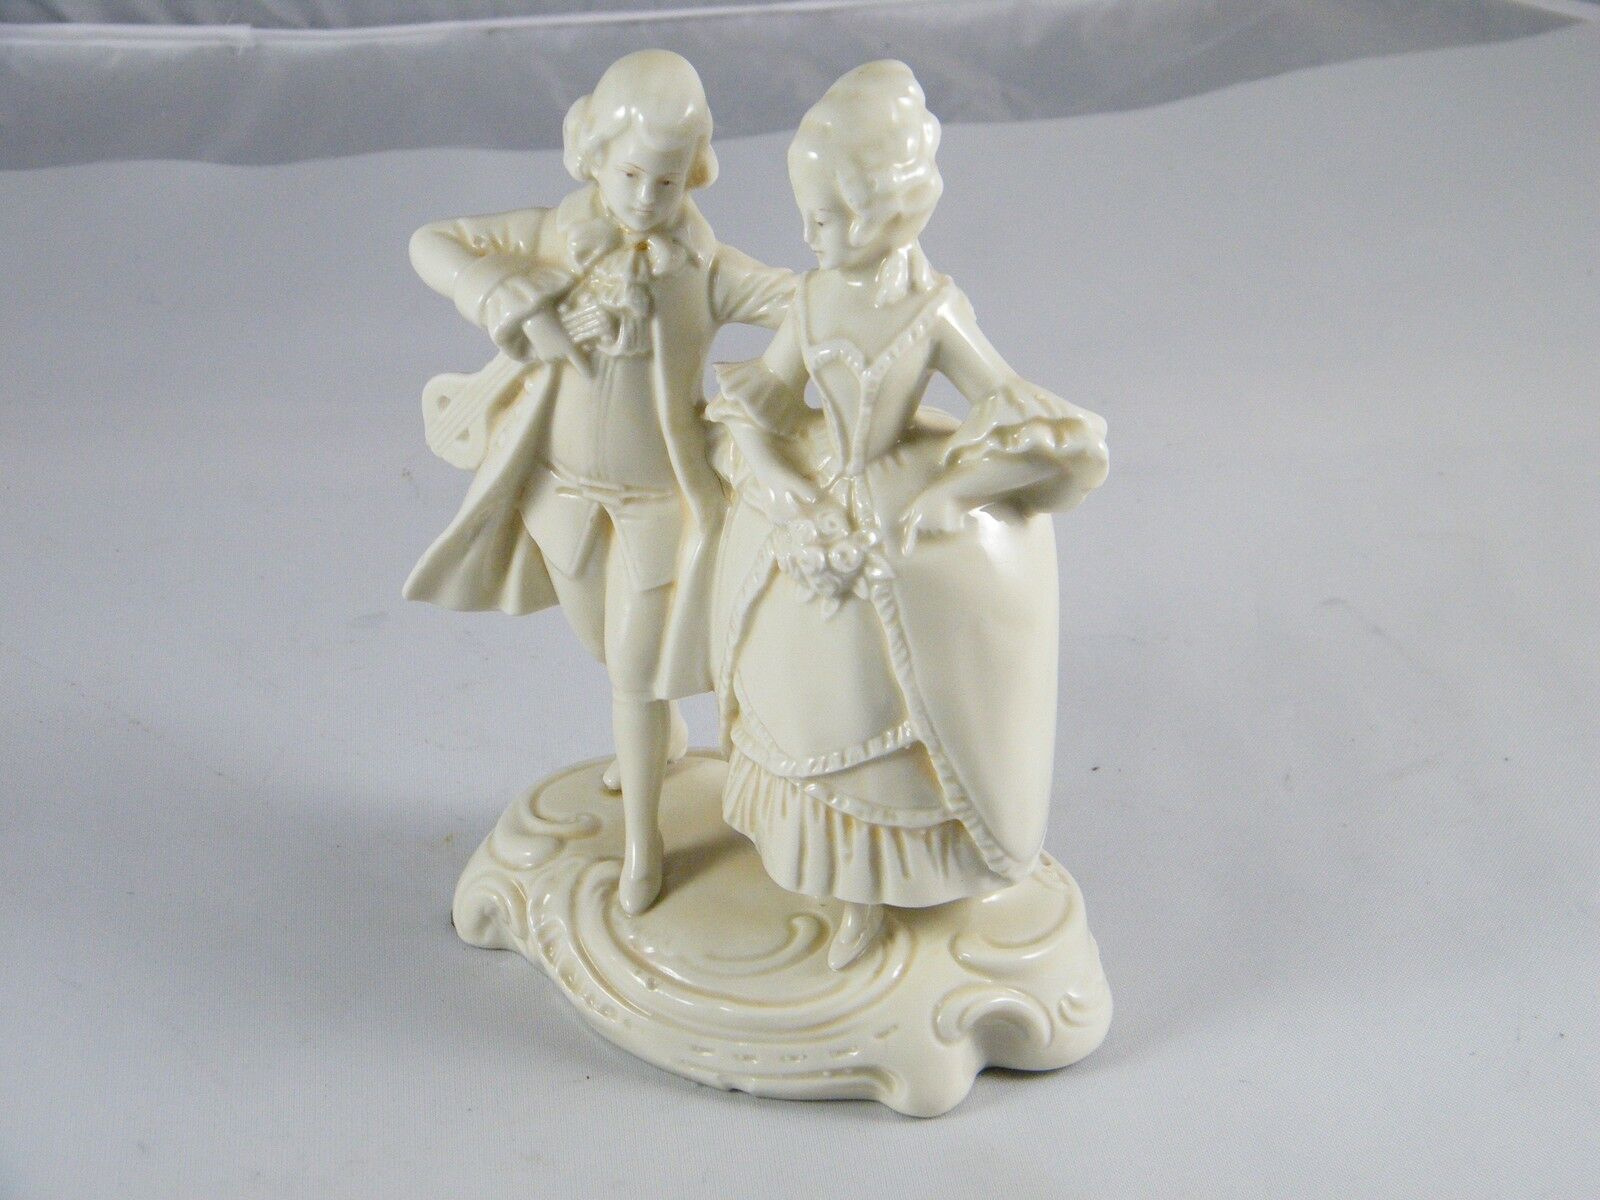 VINTAGE MADE IN THURINGIA WHITE PORCELAIN COLONIAL LADY WALKING WITH LUTE PLAYER